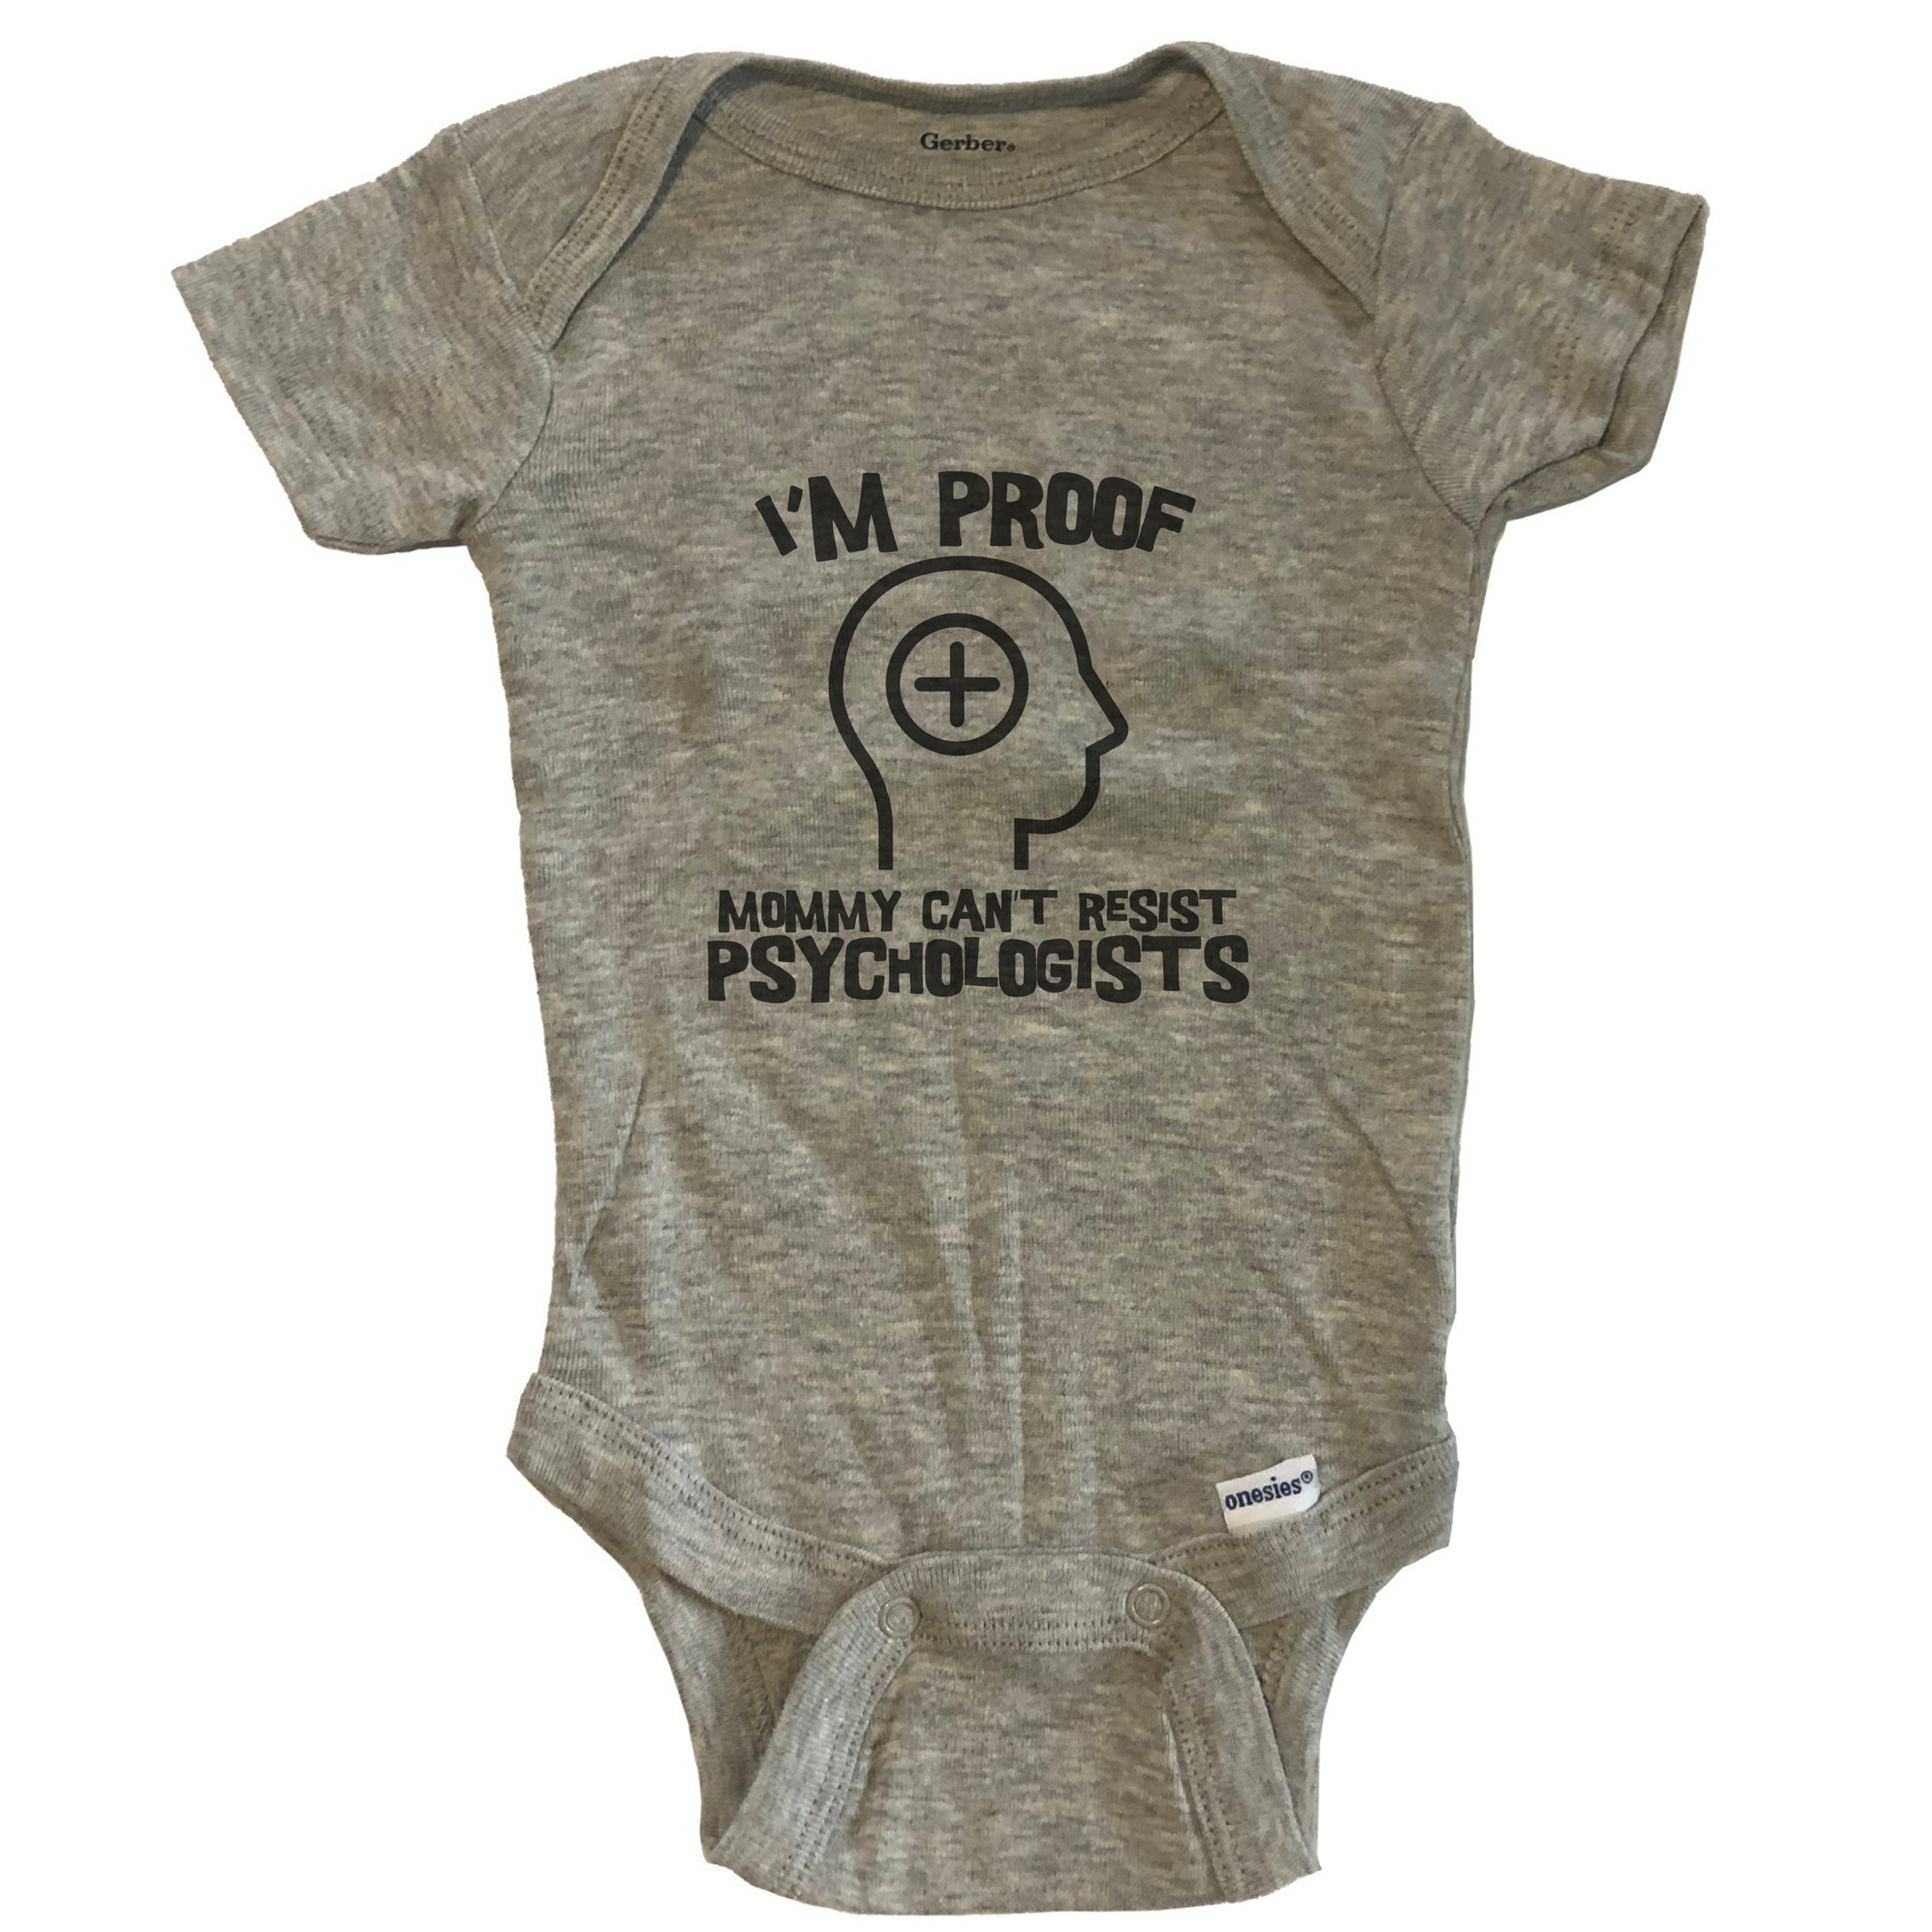 Details about   I'm Proof Mommy Can't Resist Psychologists Funny Psychology Baby Onesie 